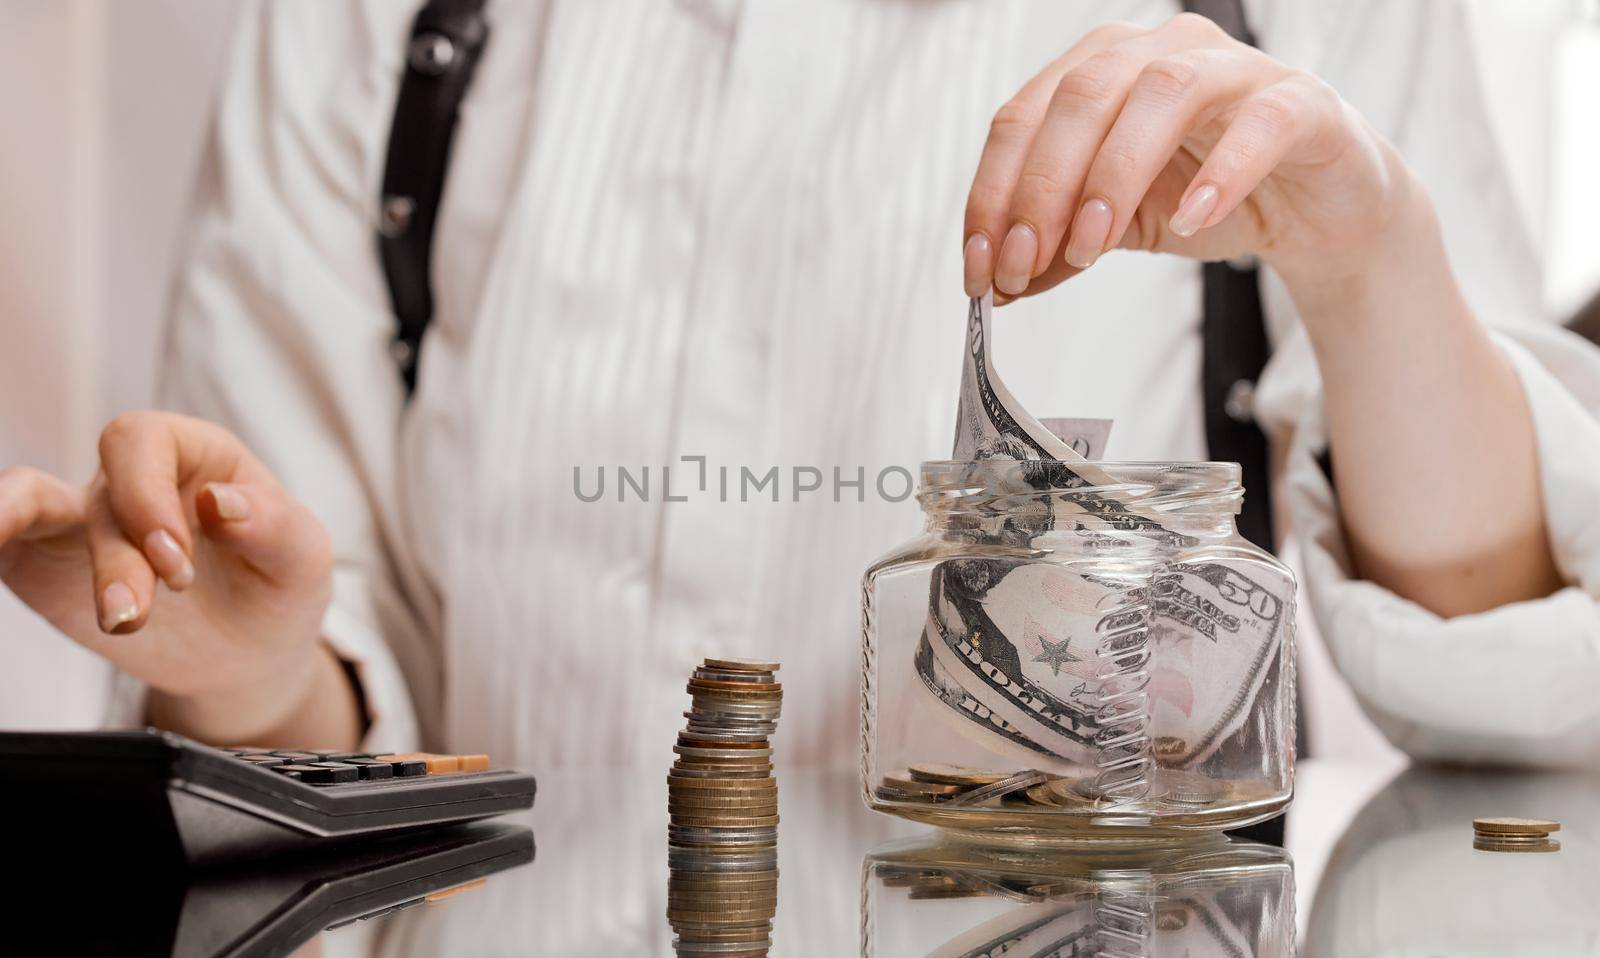 woman after counting on a classic calculator pulls a banknote from the jar. High quality photo